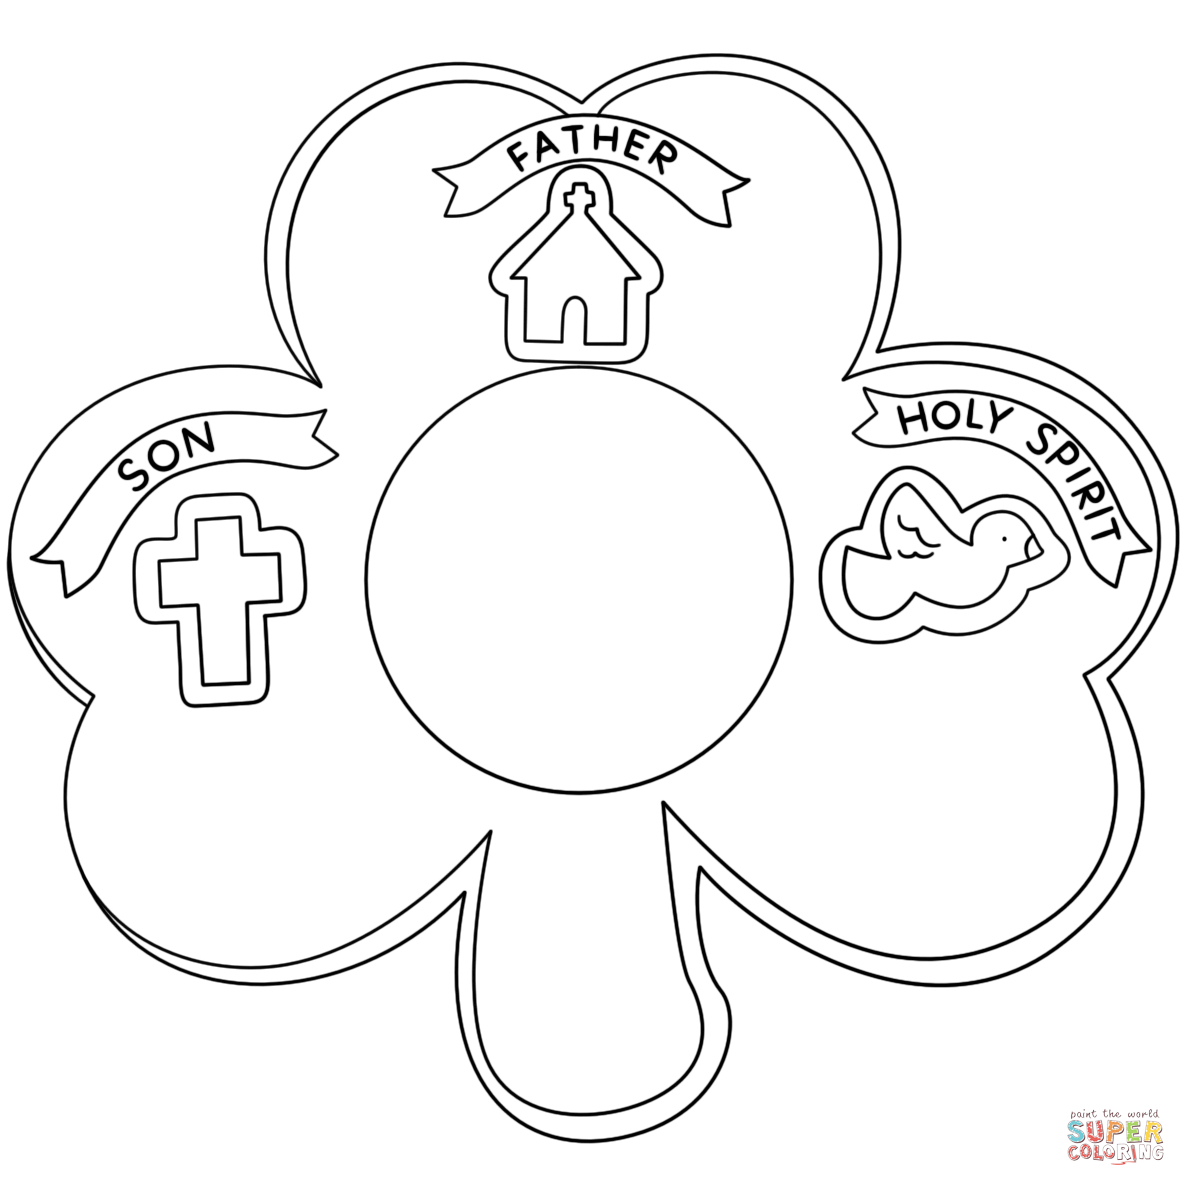 Shamrock Holy Trinity Coloring Page | Free Printable Coloring Pages - Free Printable Shamrocks